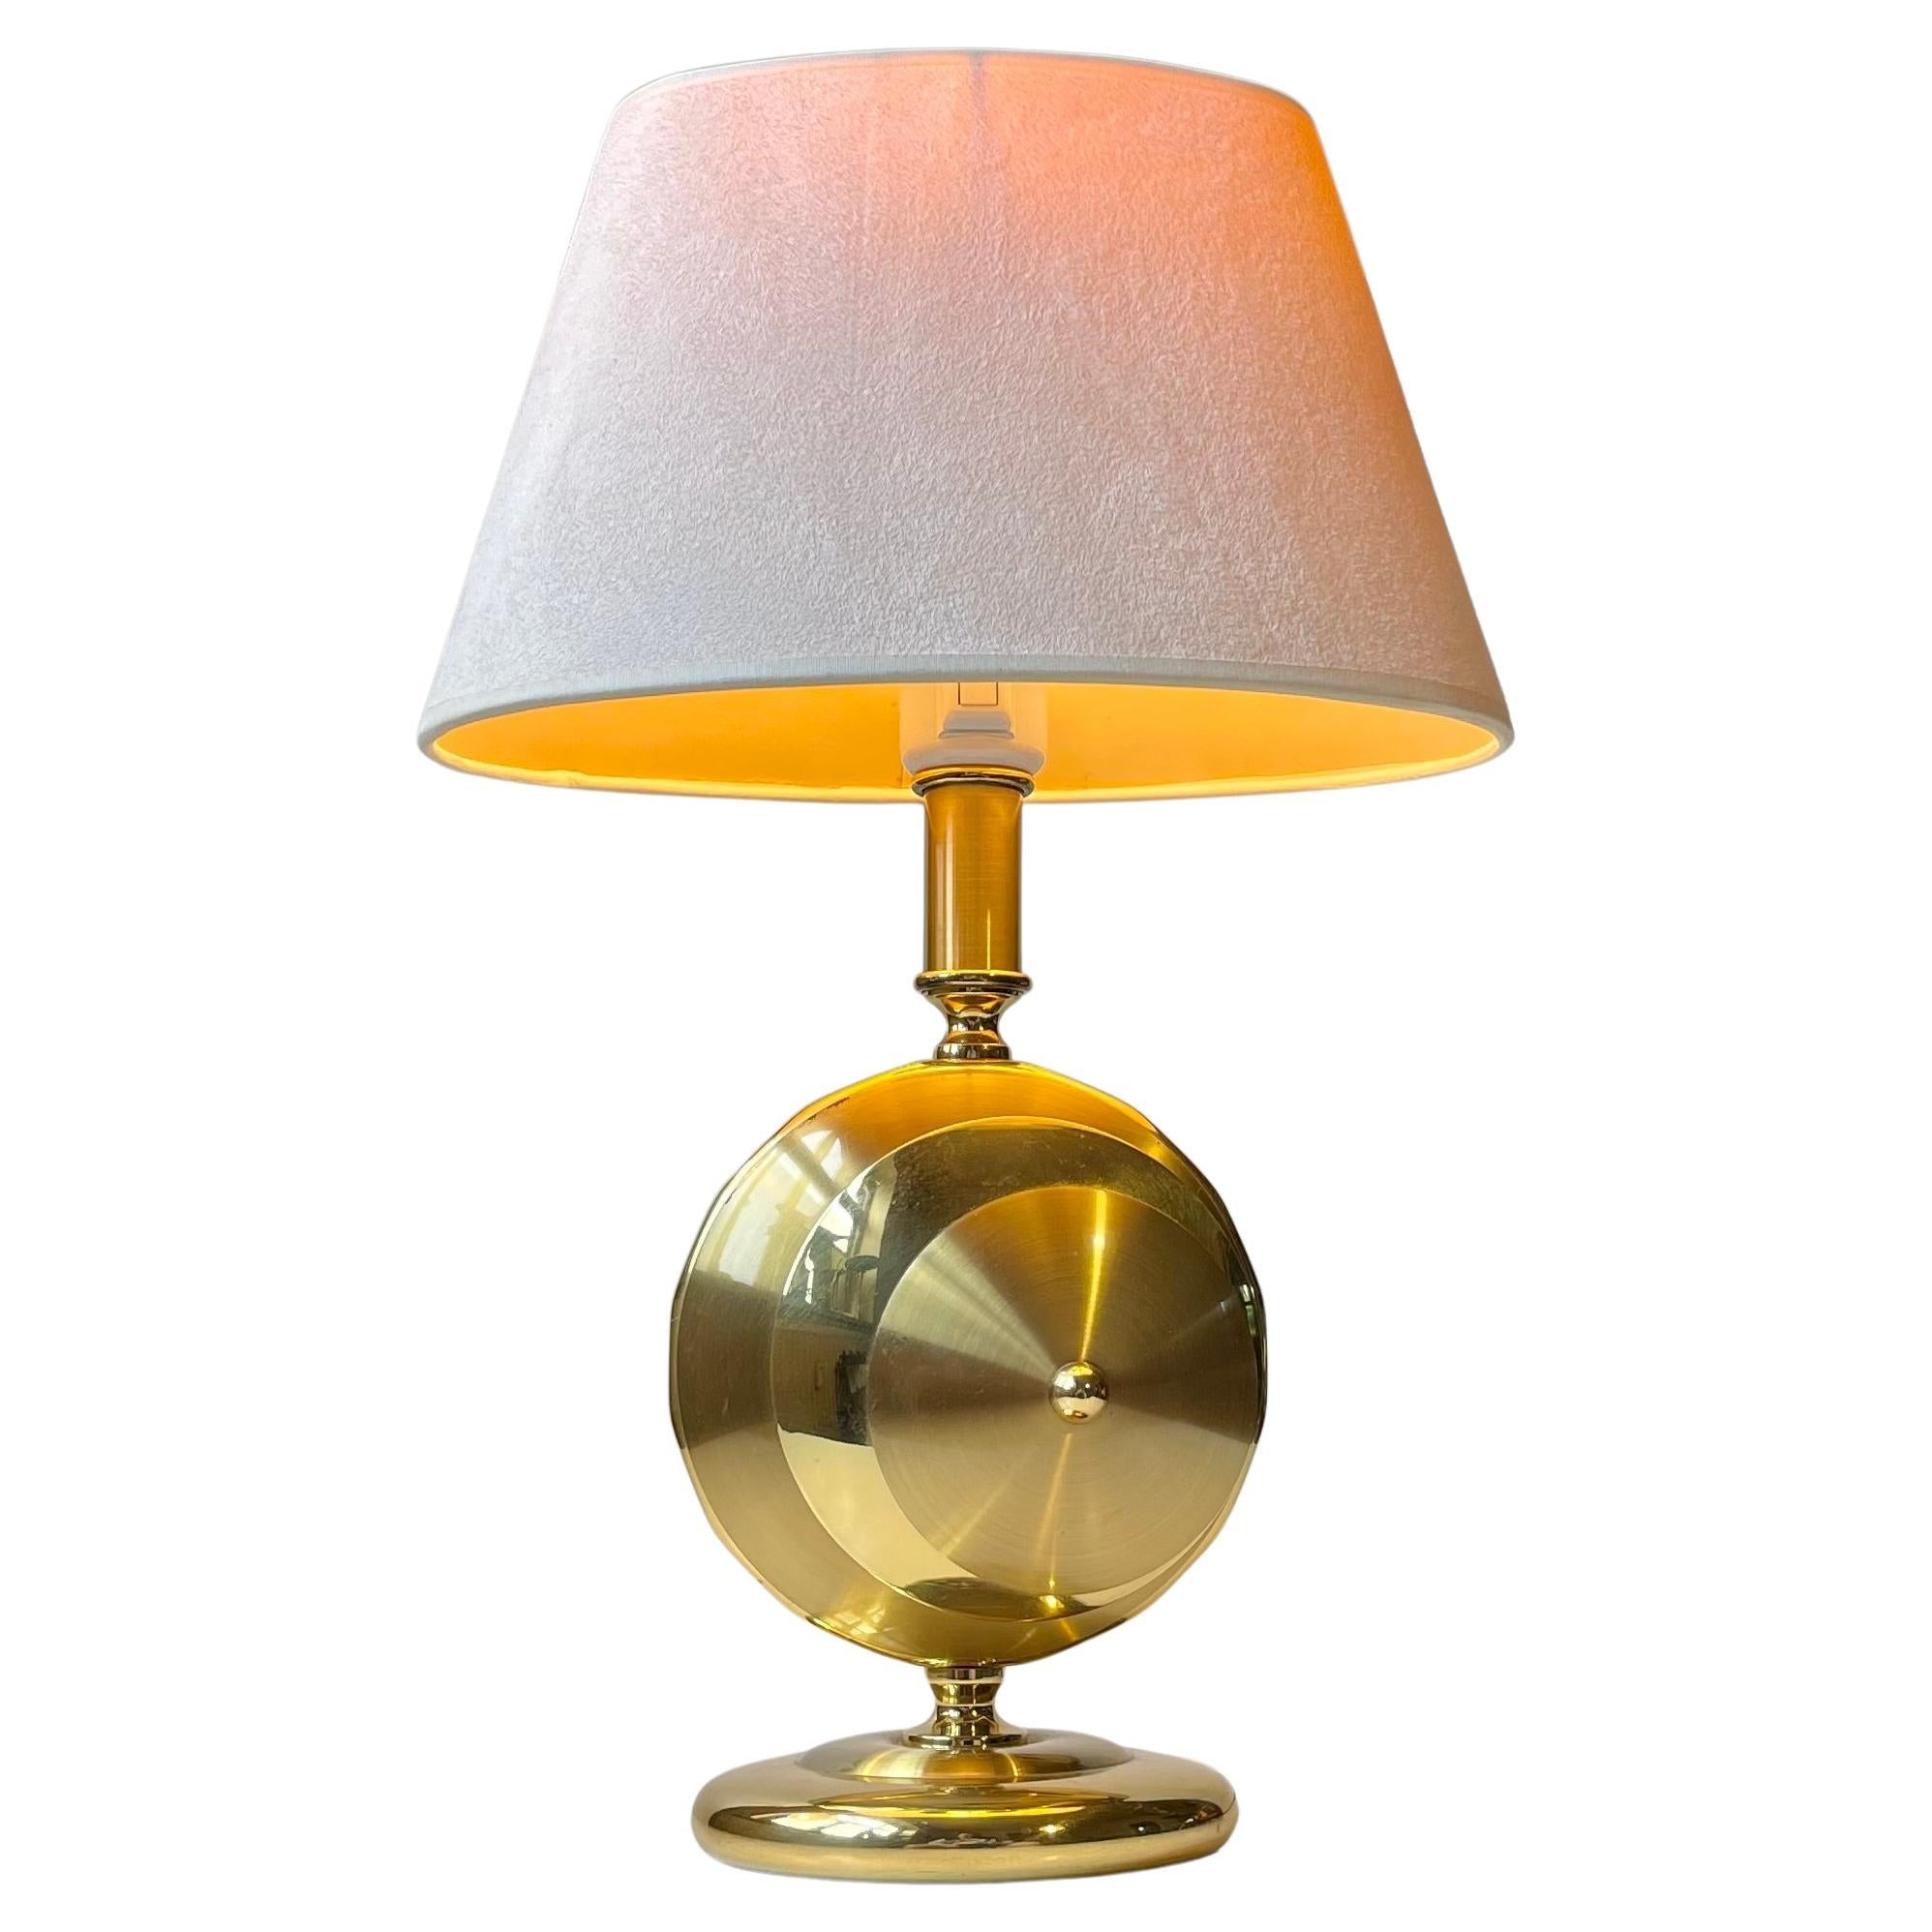 Art Deco Revival Mantle Table Lamp in Brass by TS Belysning, 1980s